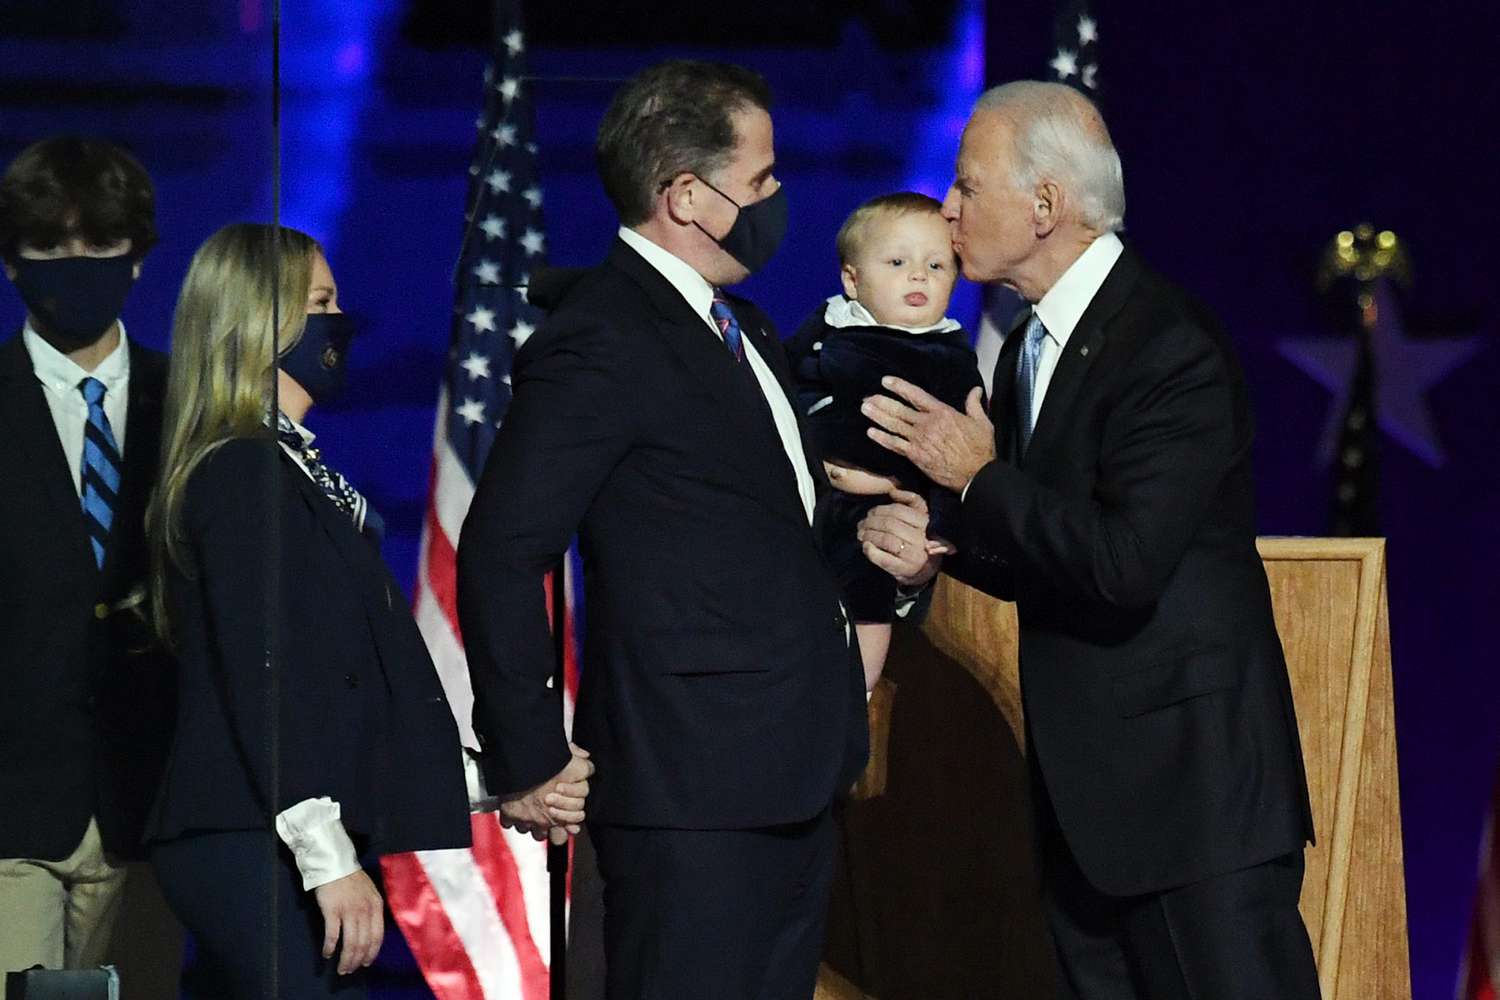 President-elect Joe Biden kisses his grandson as his son Hunter and wife Melissa Cohen look on as they celebrate onstage after Biden defeated Republican President Donald Trump in the 2020